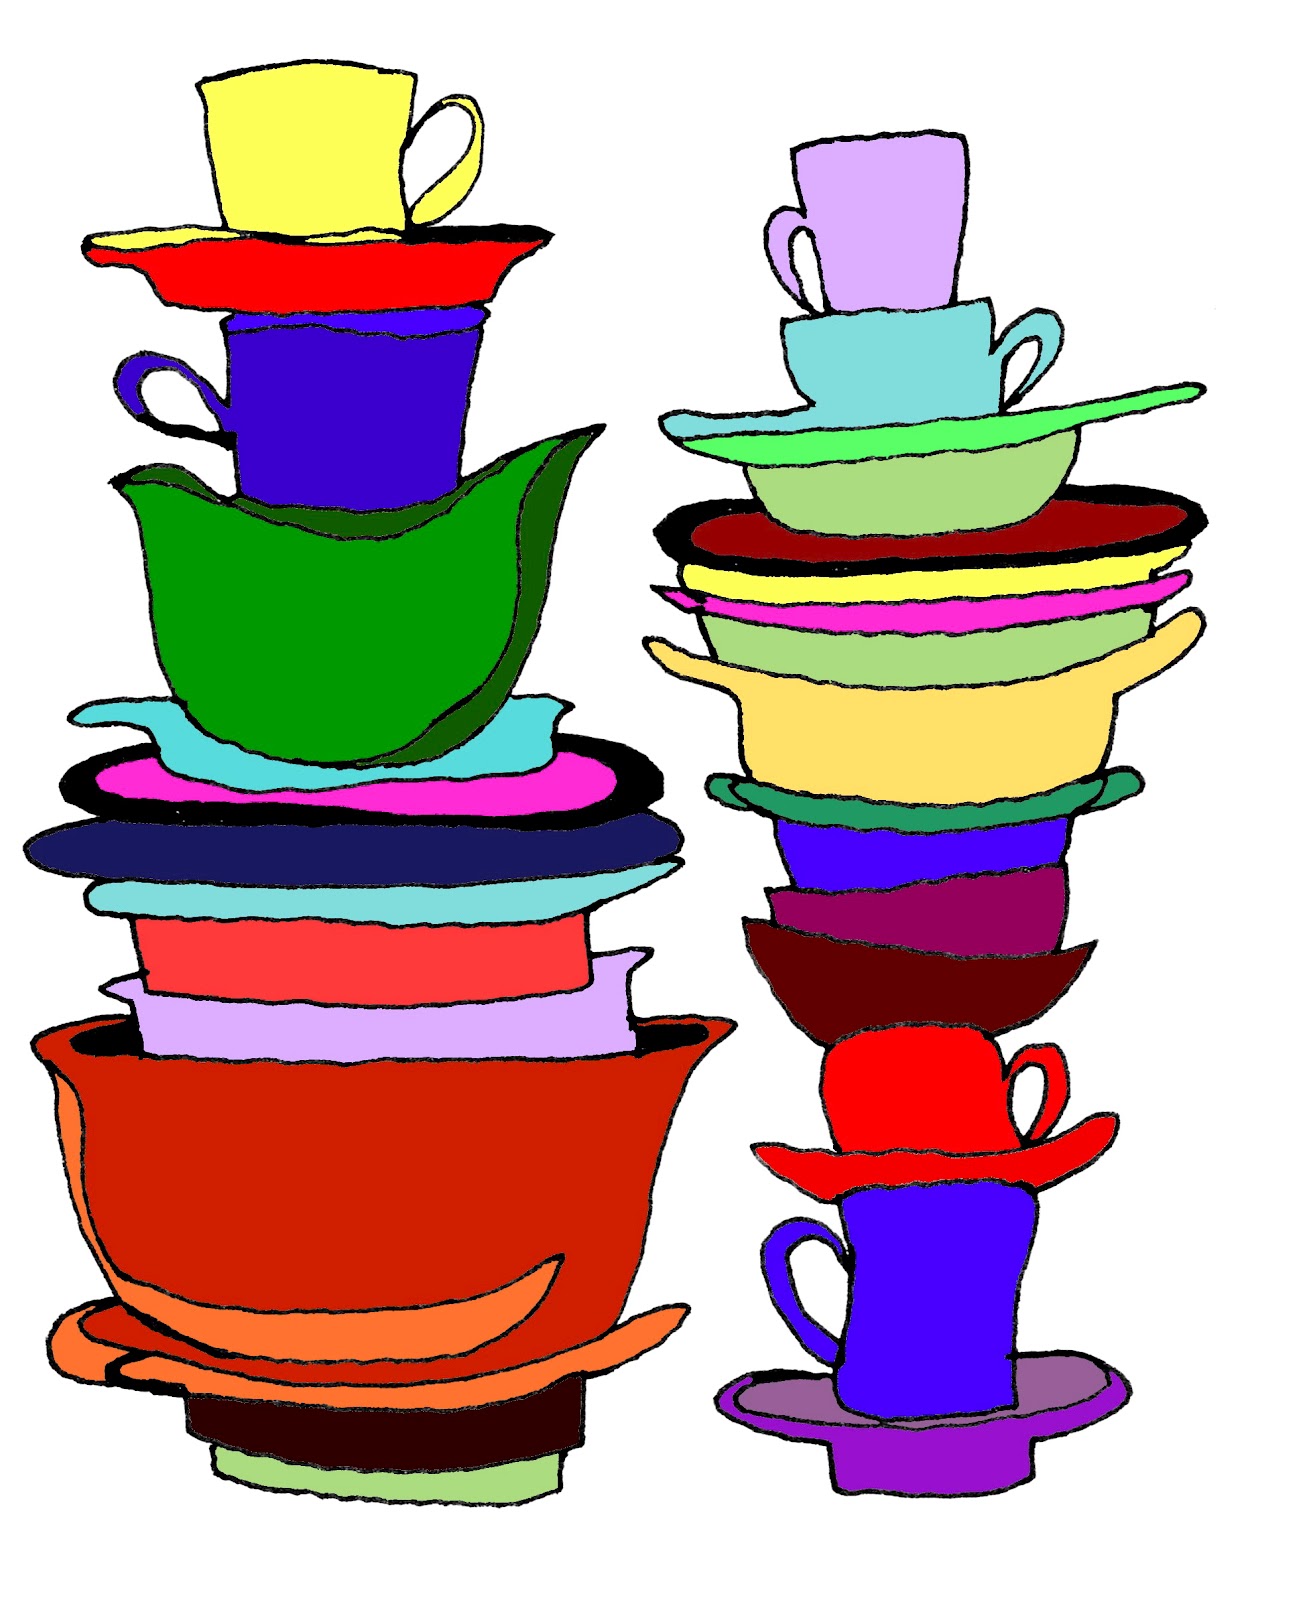 free clipart images dirty dishes - photo #47